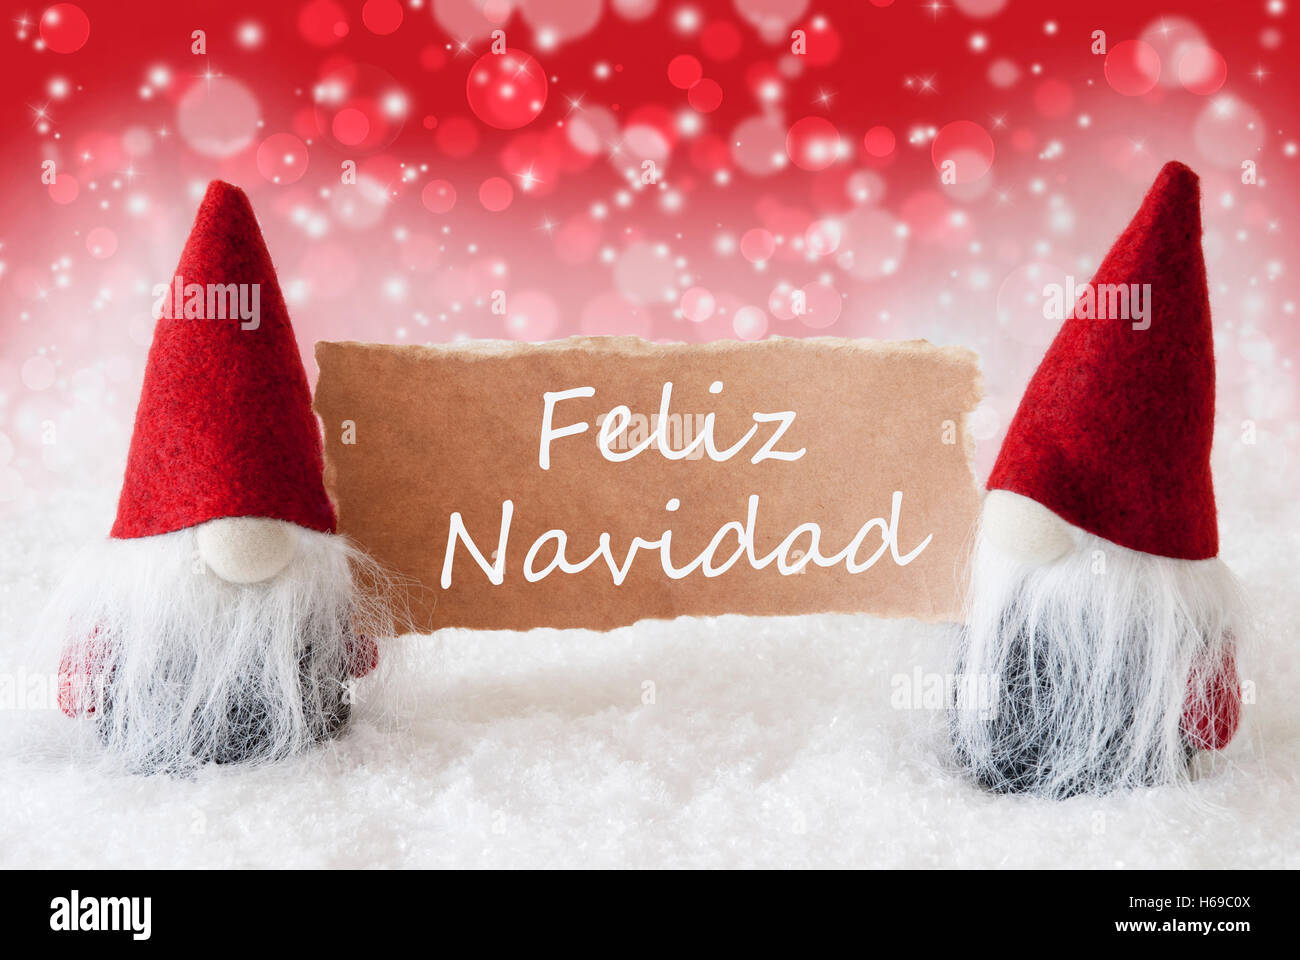 Red Christmassy Gnomes With Card, Feliz Navidad Means Merry Christmas Stock Photo